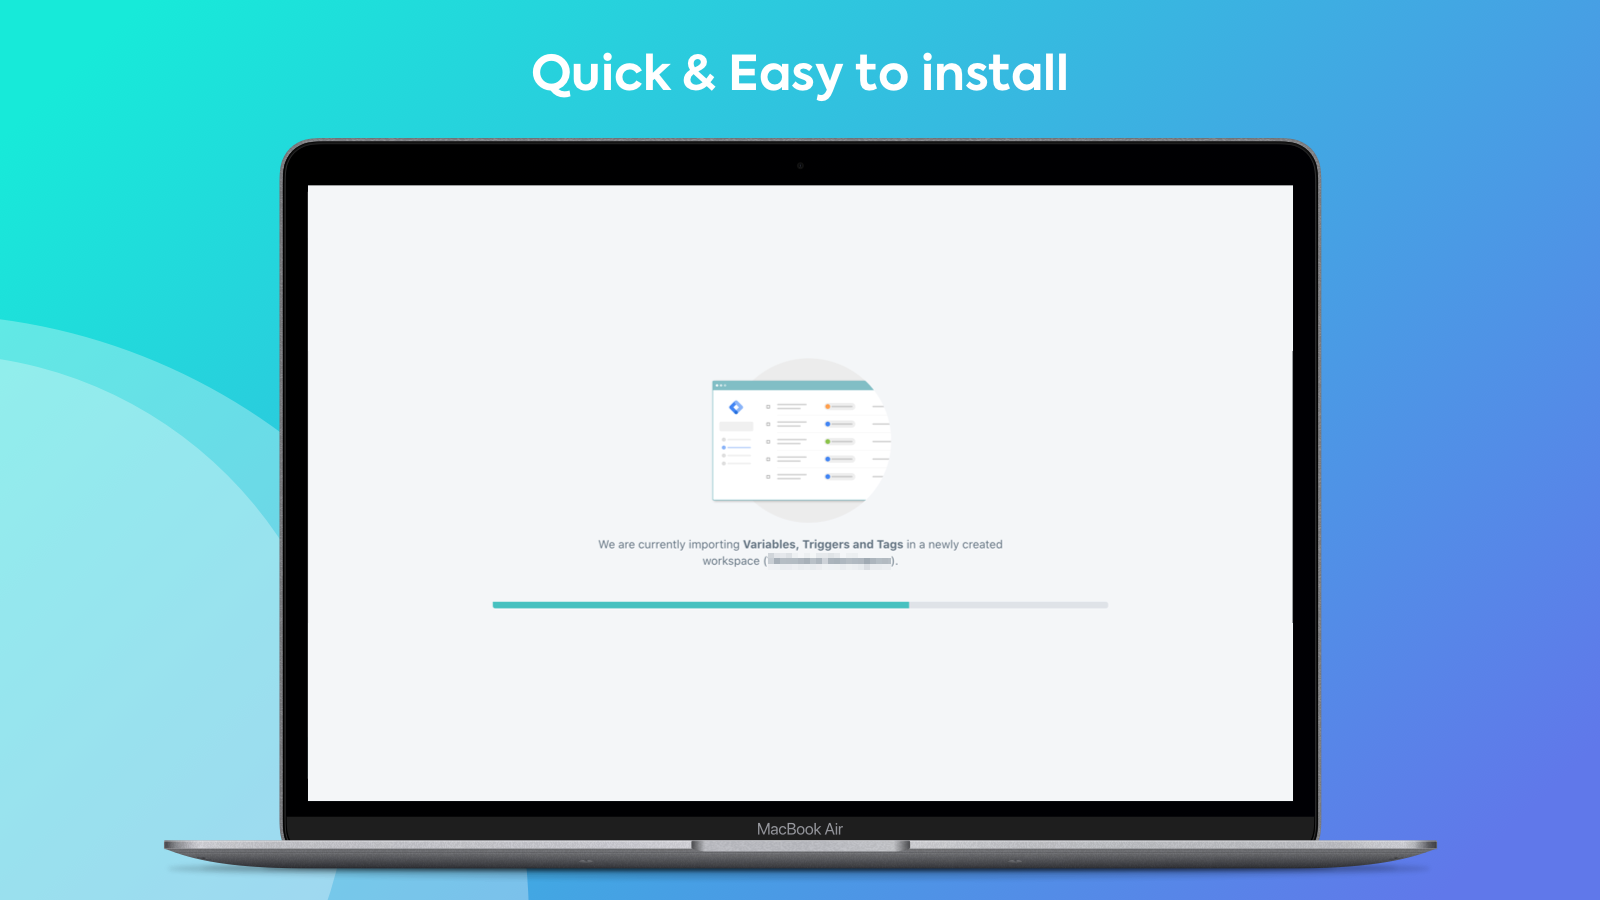 Easy Tag - Quick & Easy to install